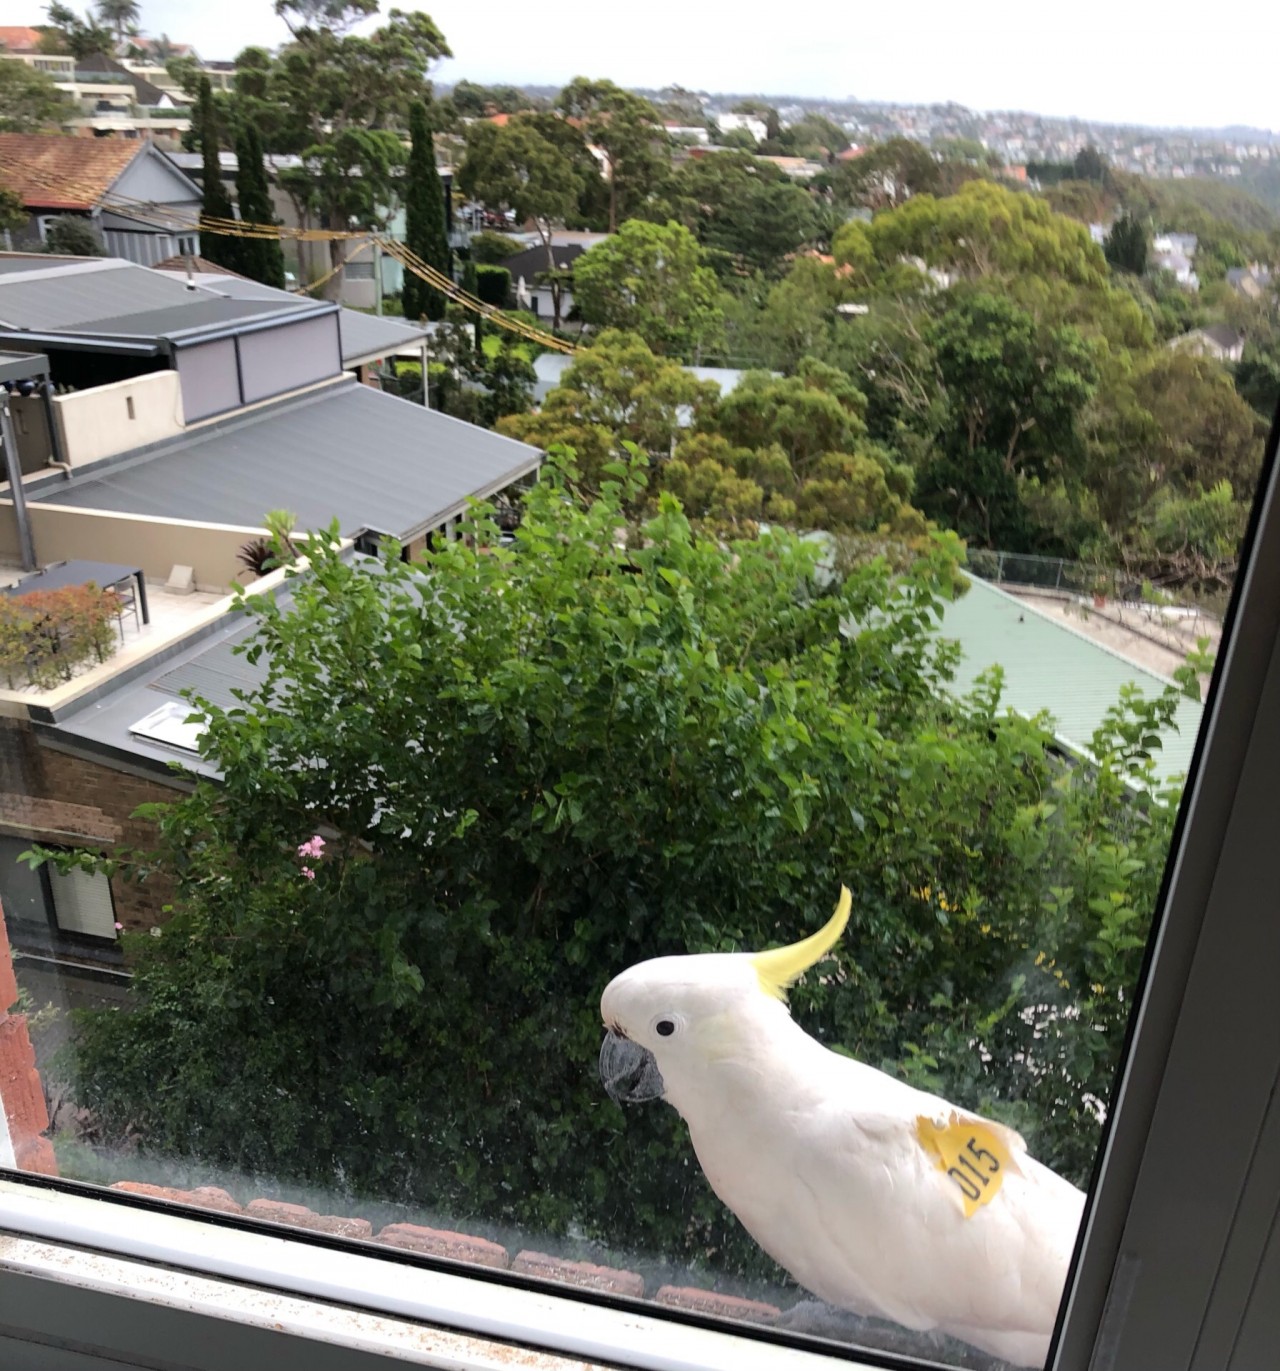 Hazel kicked another cockatoo out, it had black eyes | Big City 